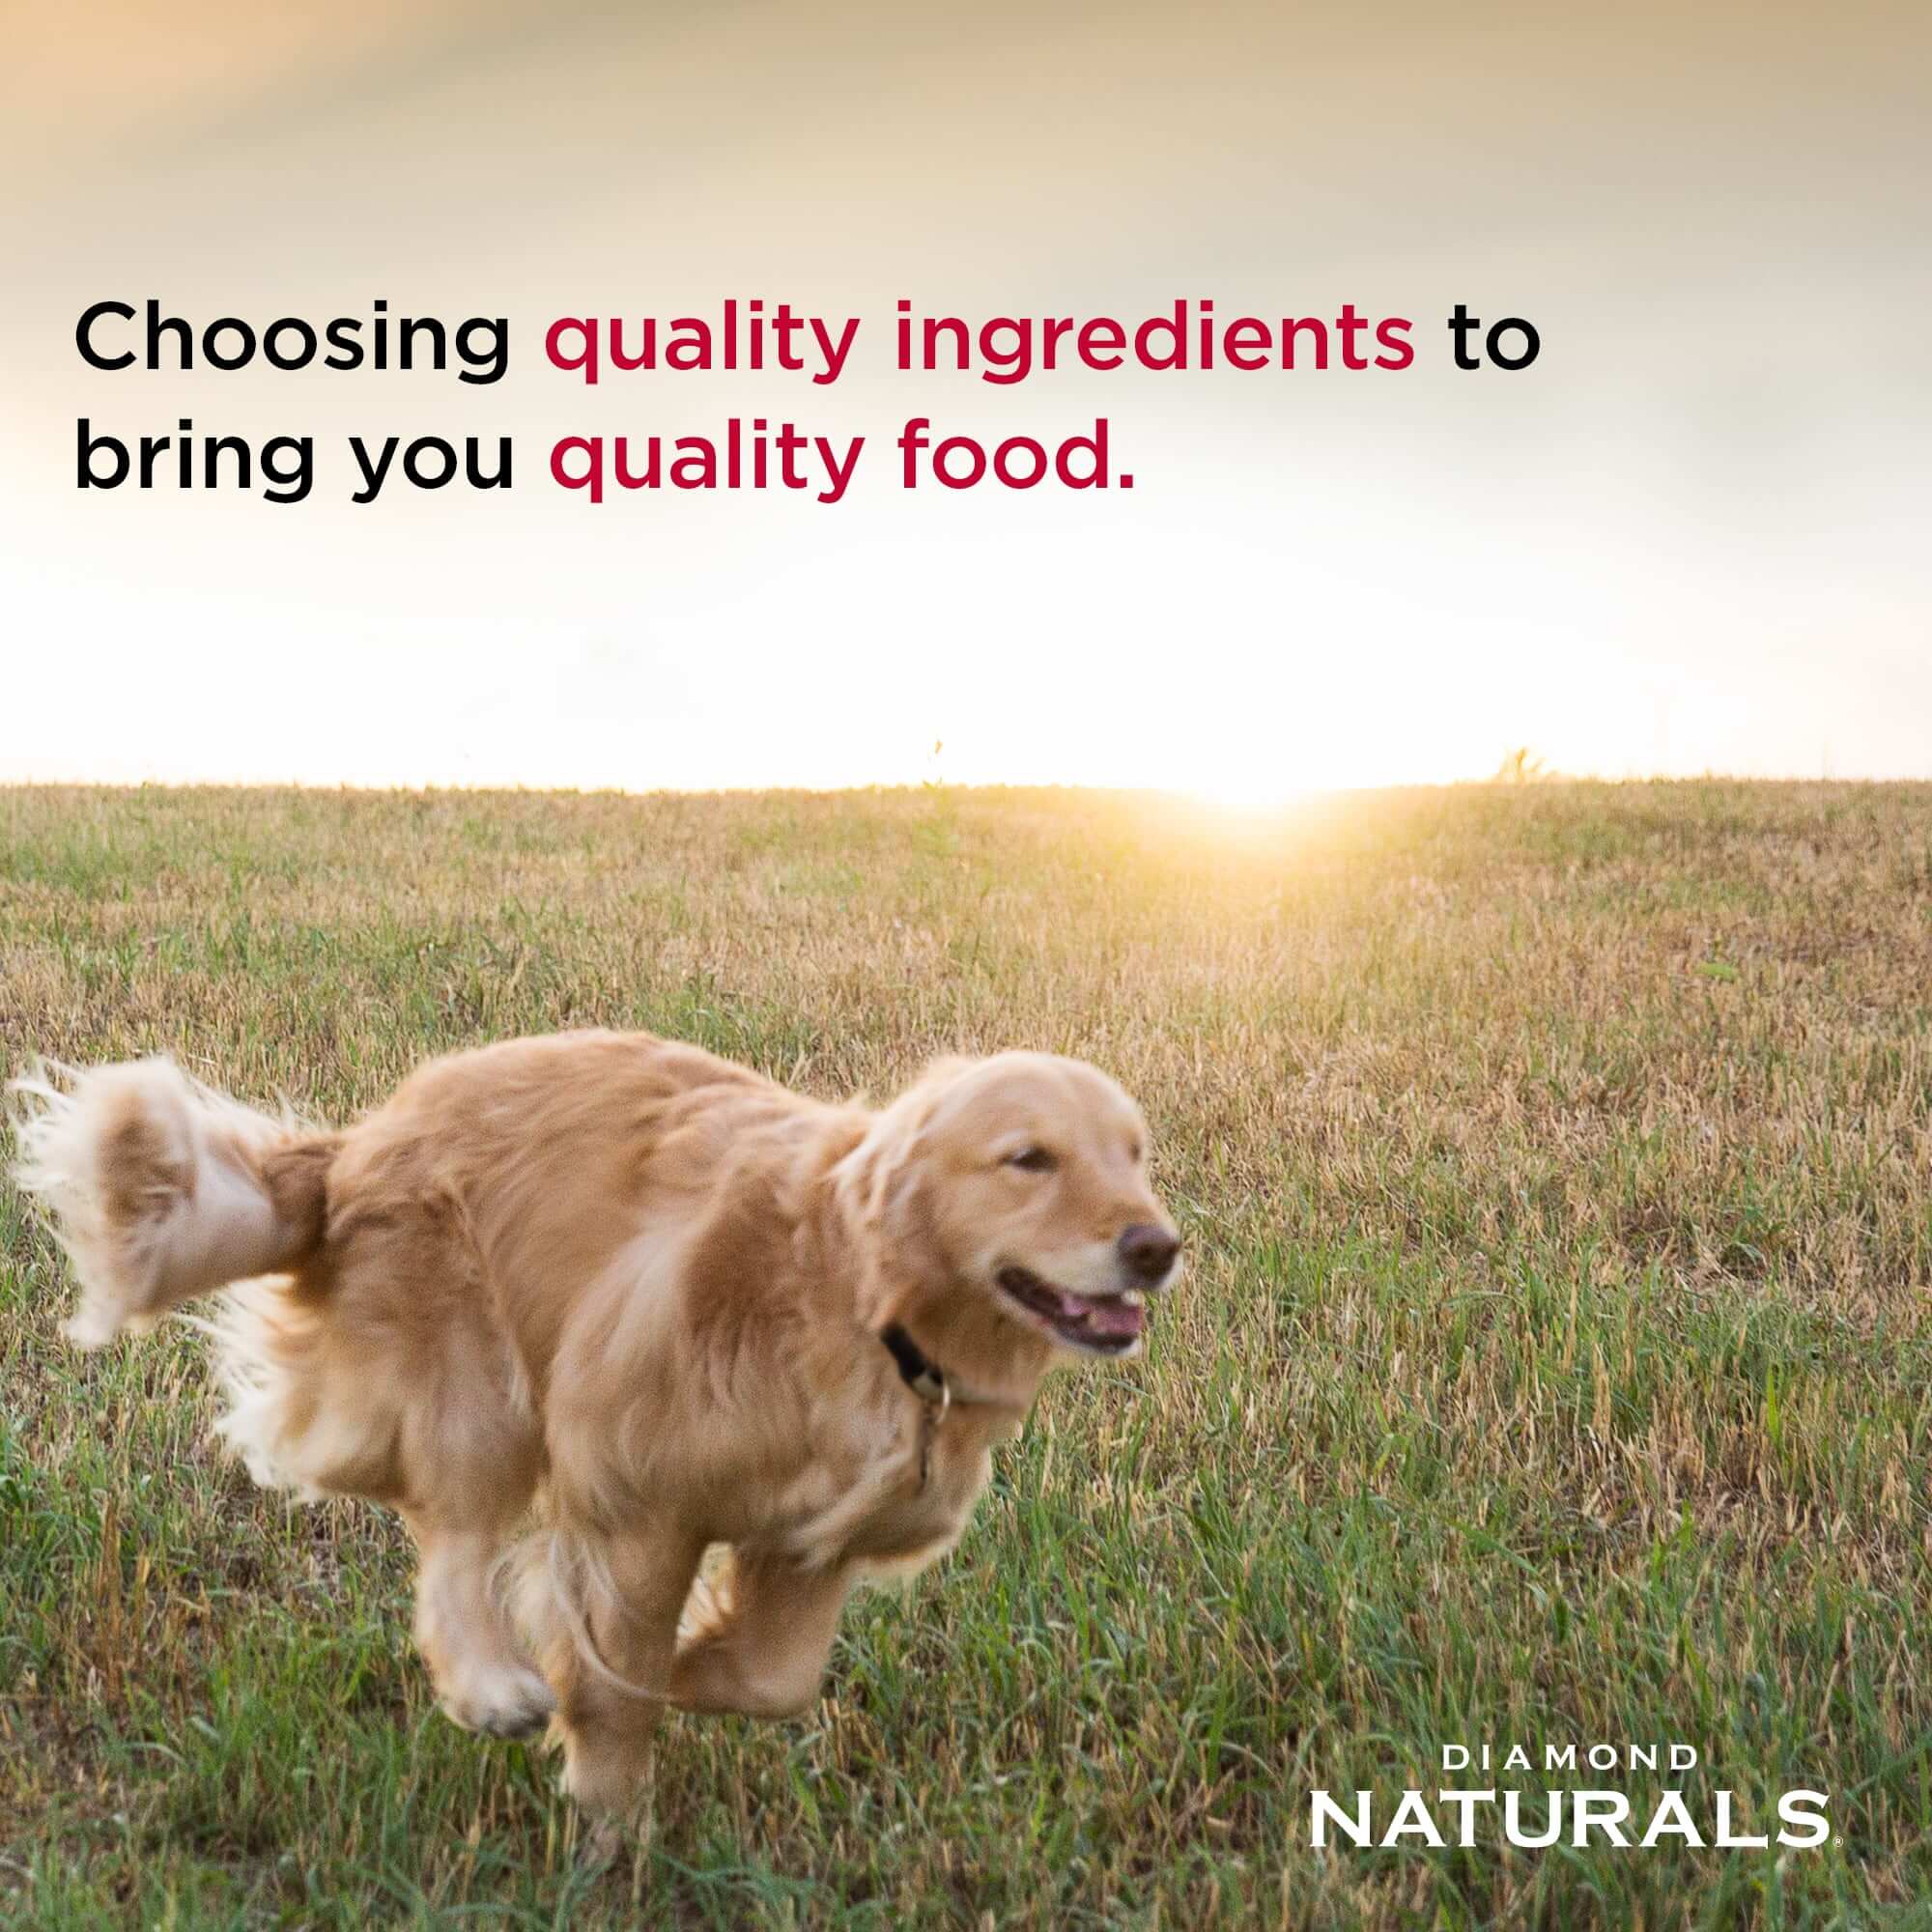 Diamond Choose quality ingredients to bring you quality food